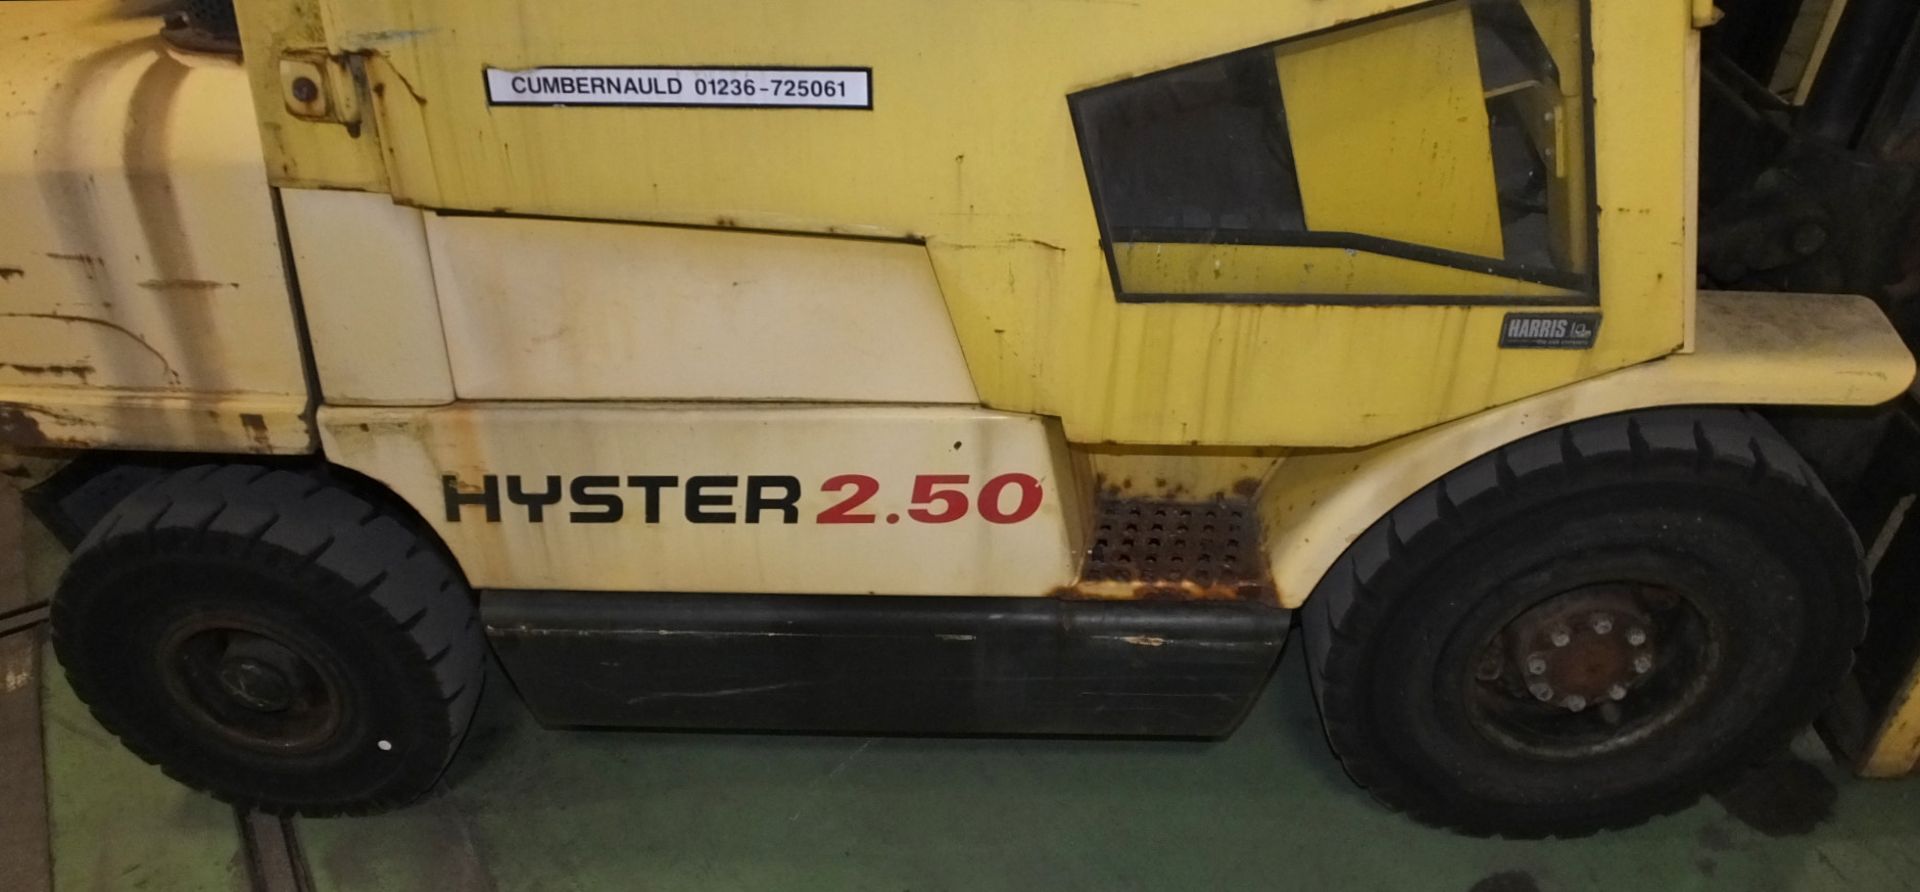 Gas Powered Counterbalance forklift - Hyster H2.50XM - 1999 - SWL 250 - New LOLER Certificate - Image 14 of 23